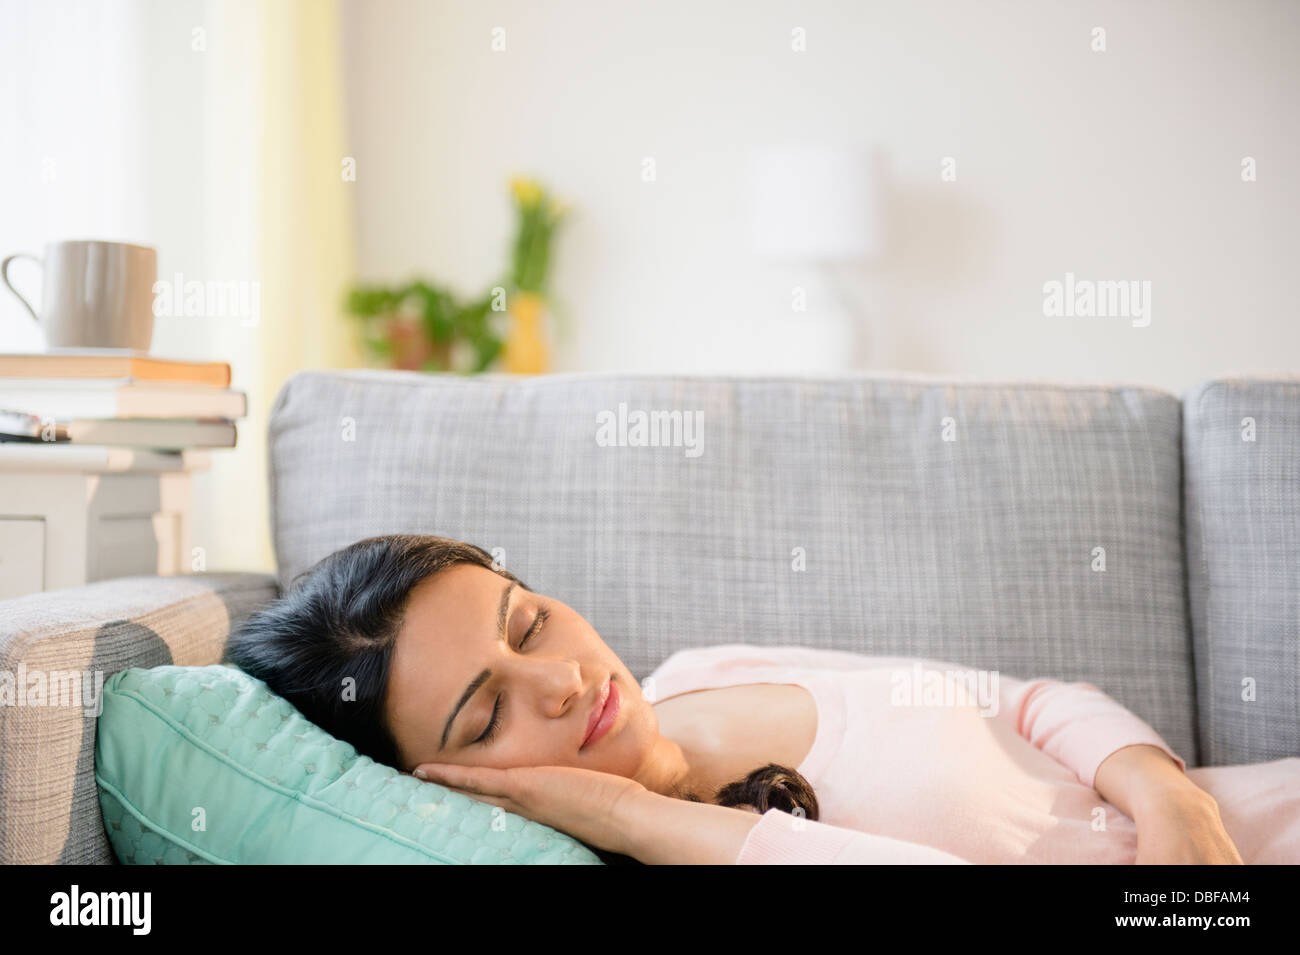 Indian woman napping on sofa Stock Photo